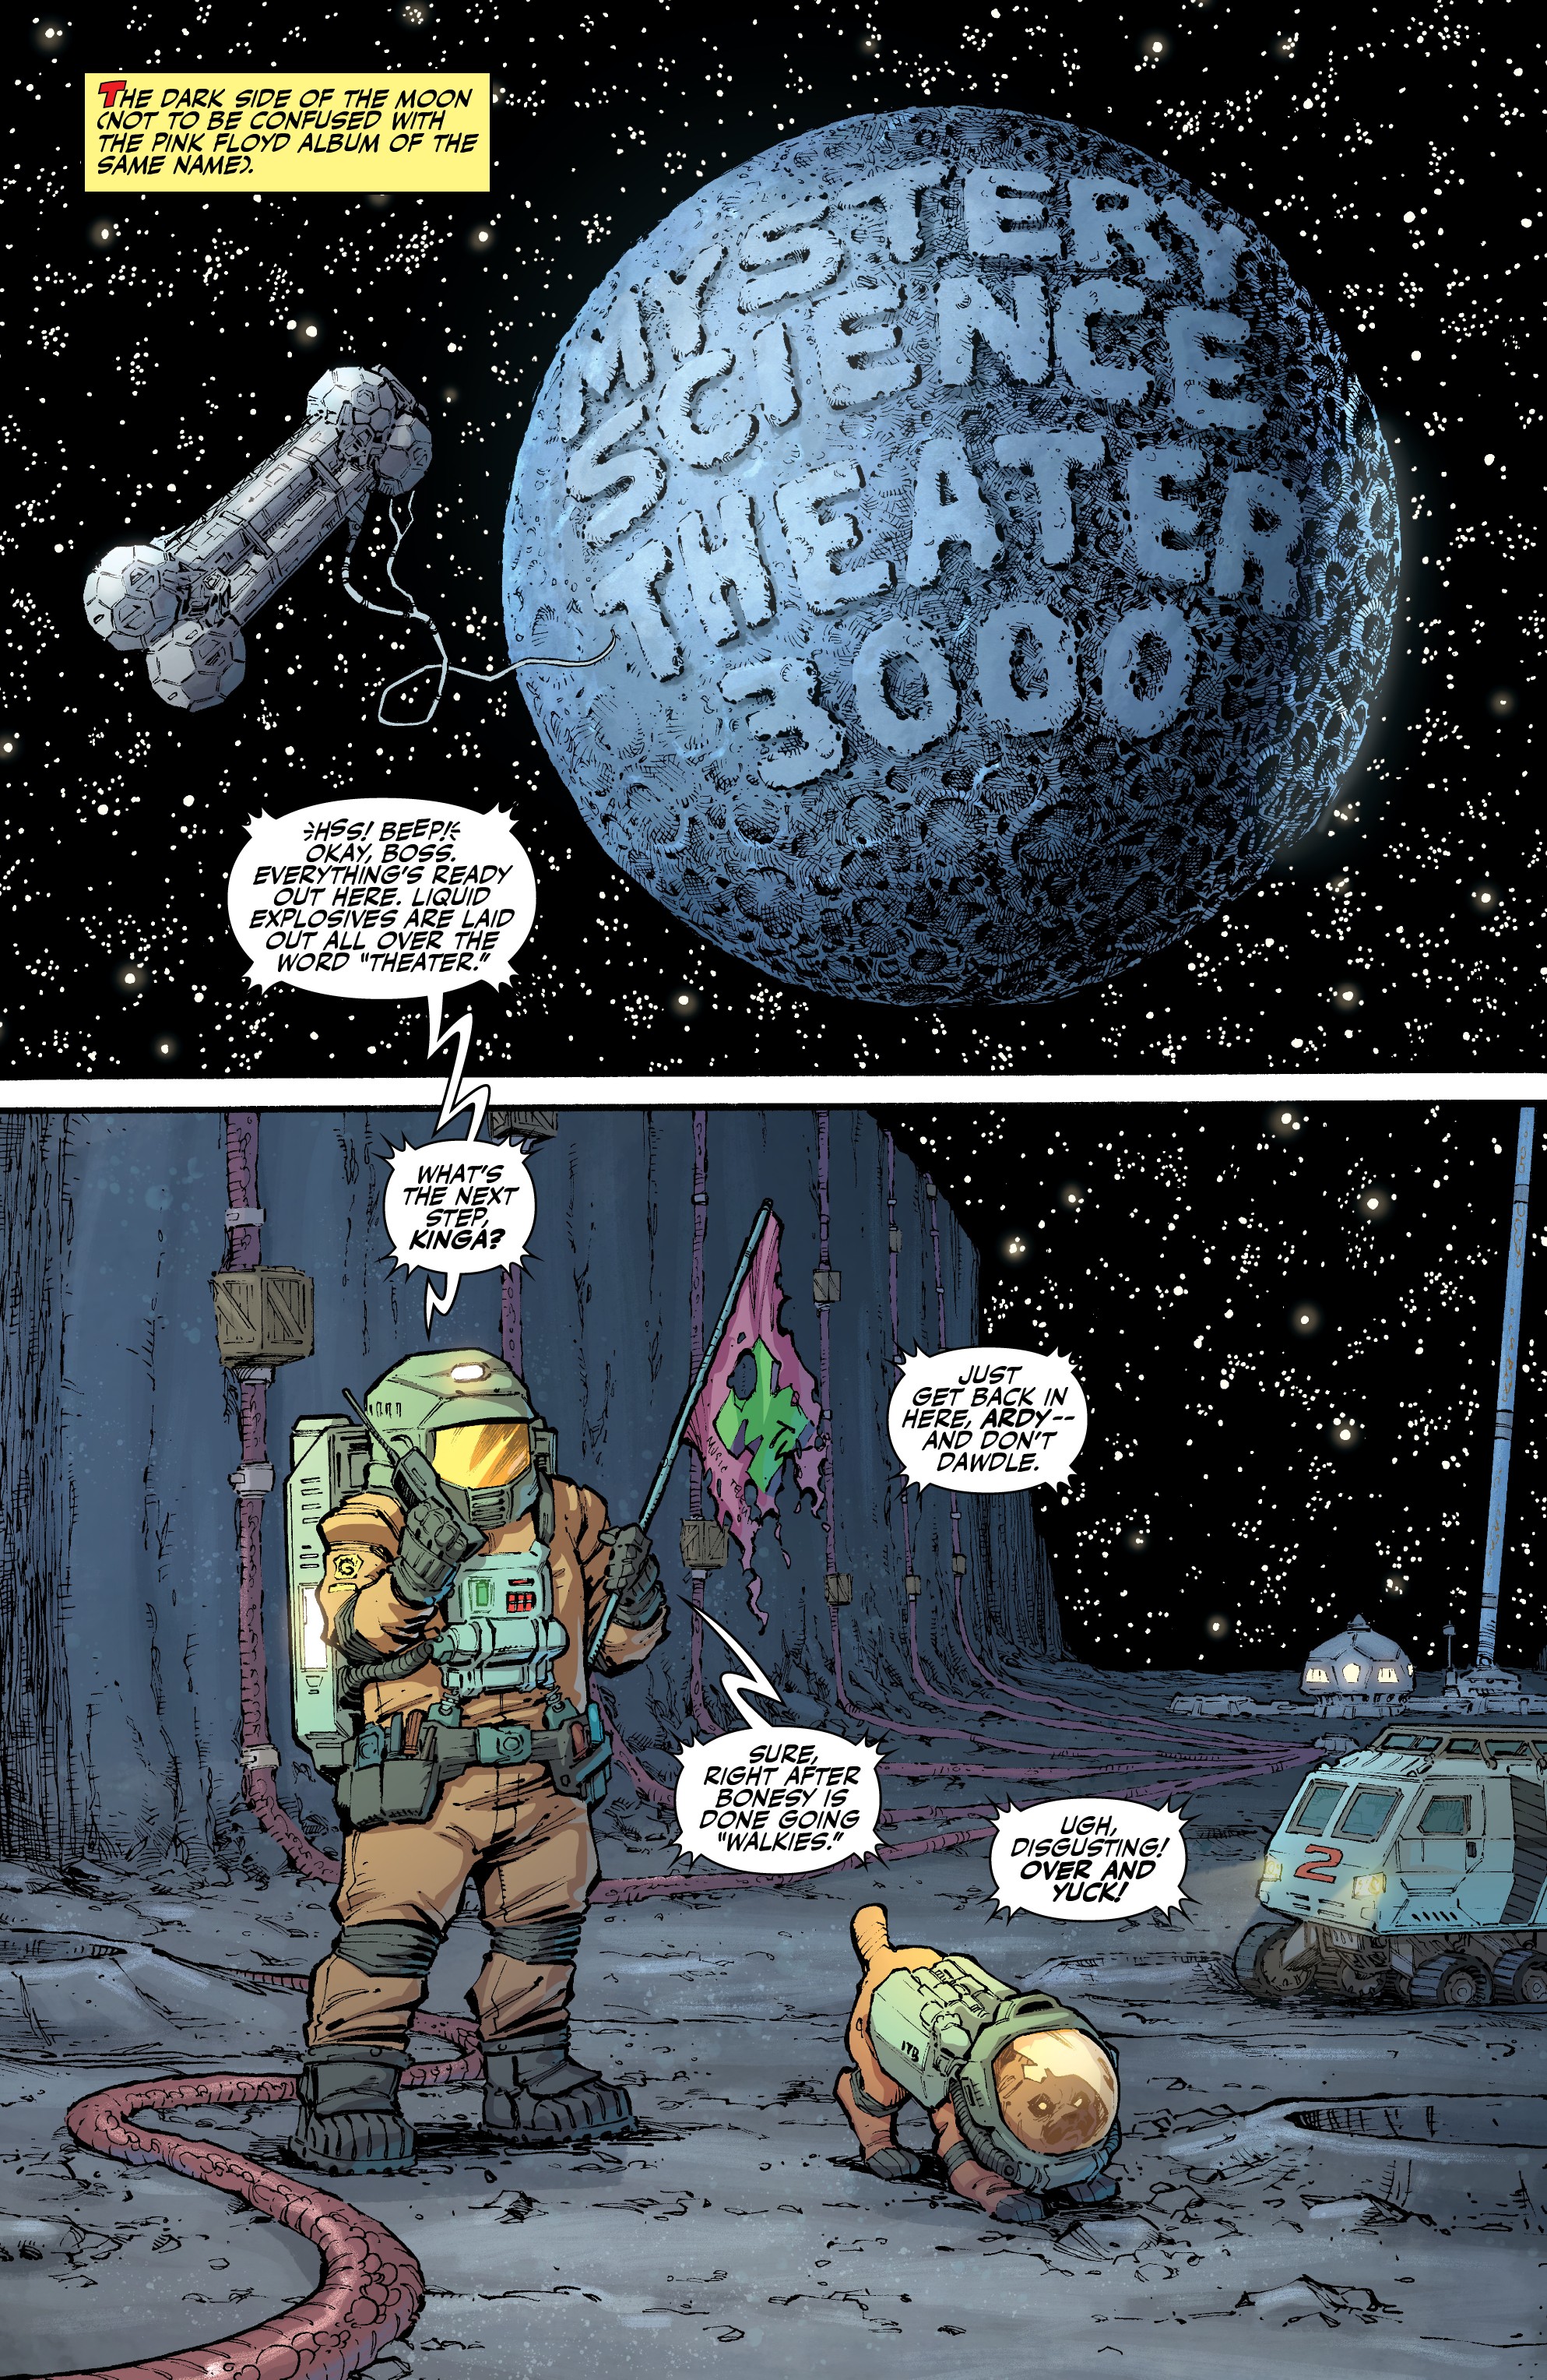 Mystery Science Theater 3000 (2018-): Chapter 1 - Page 3